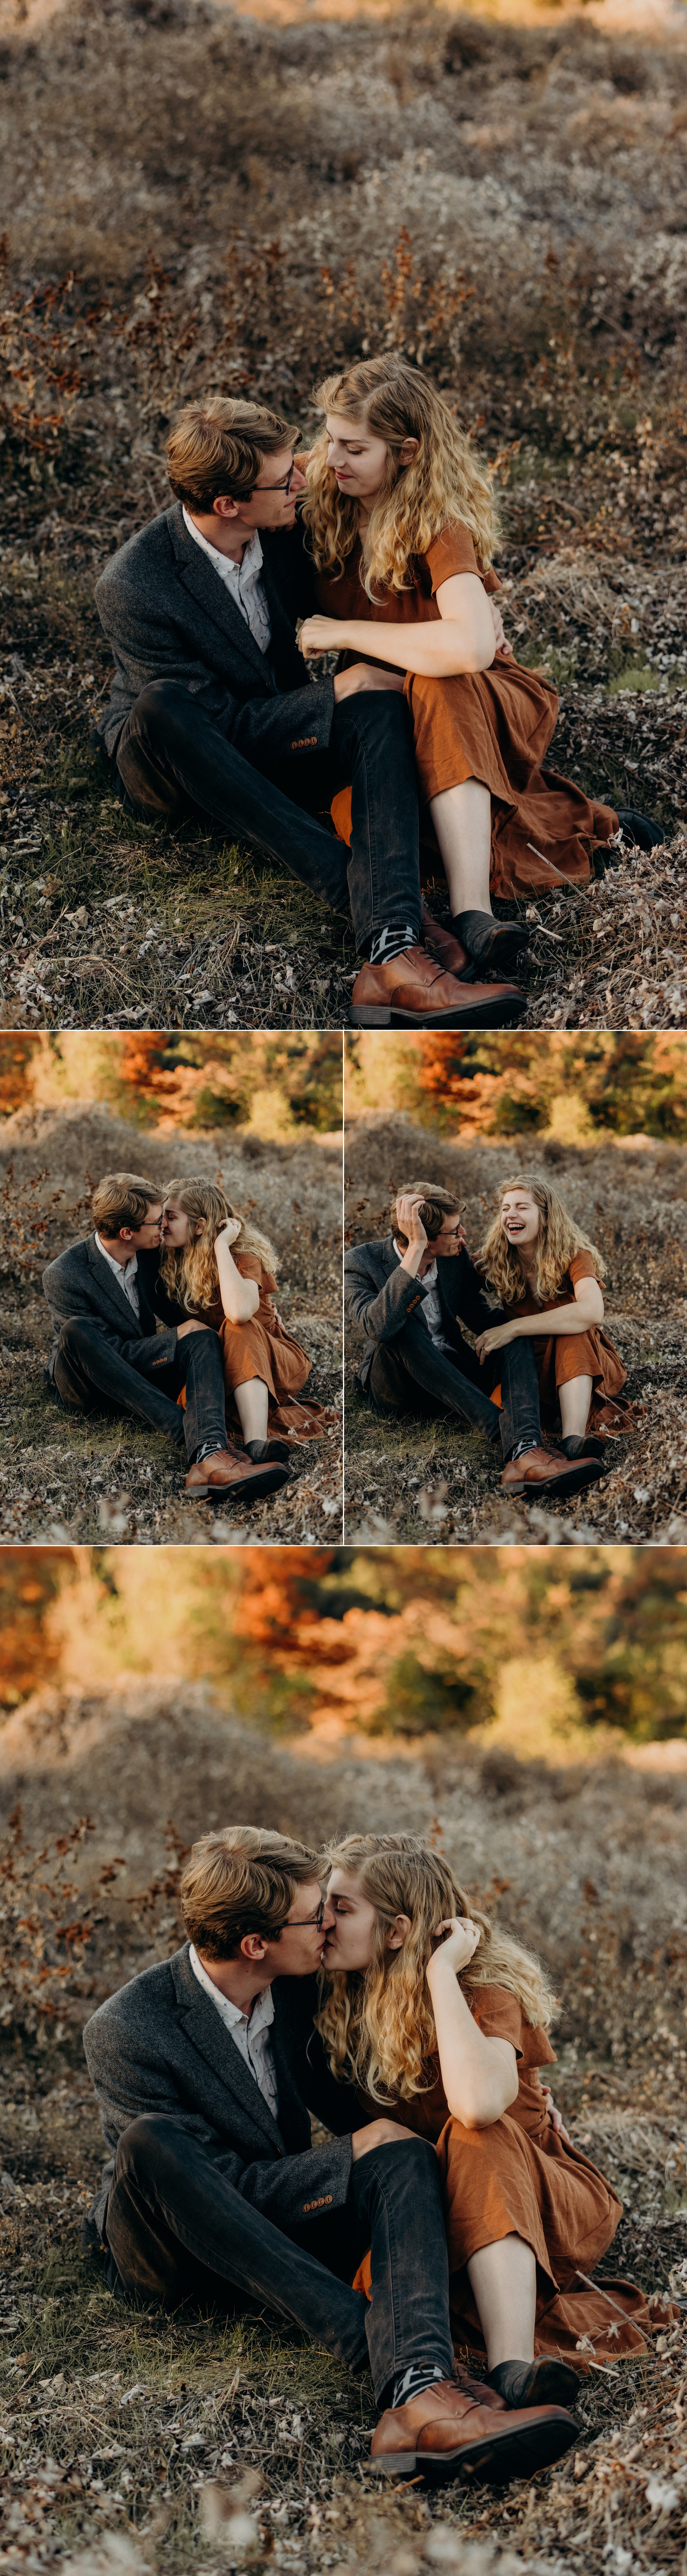  couple in field commons ford ranch park austin texas engagement session wedding elopement photographer 